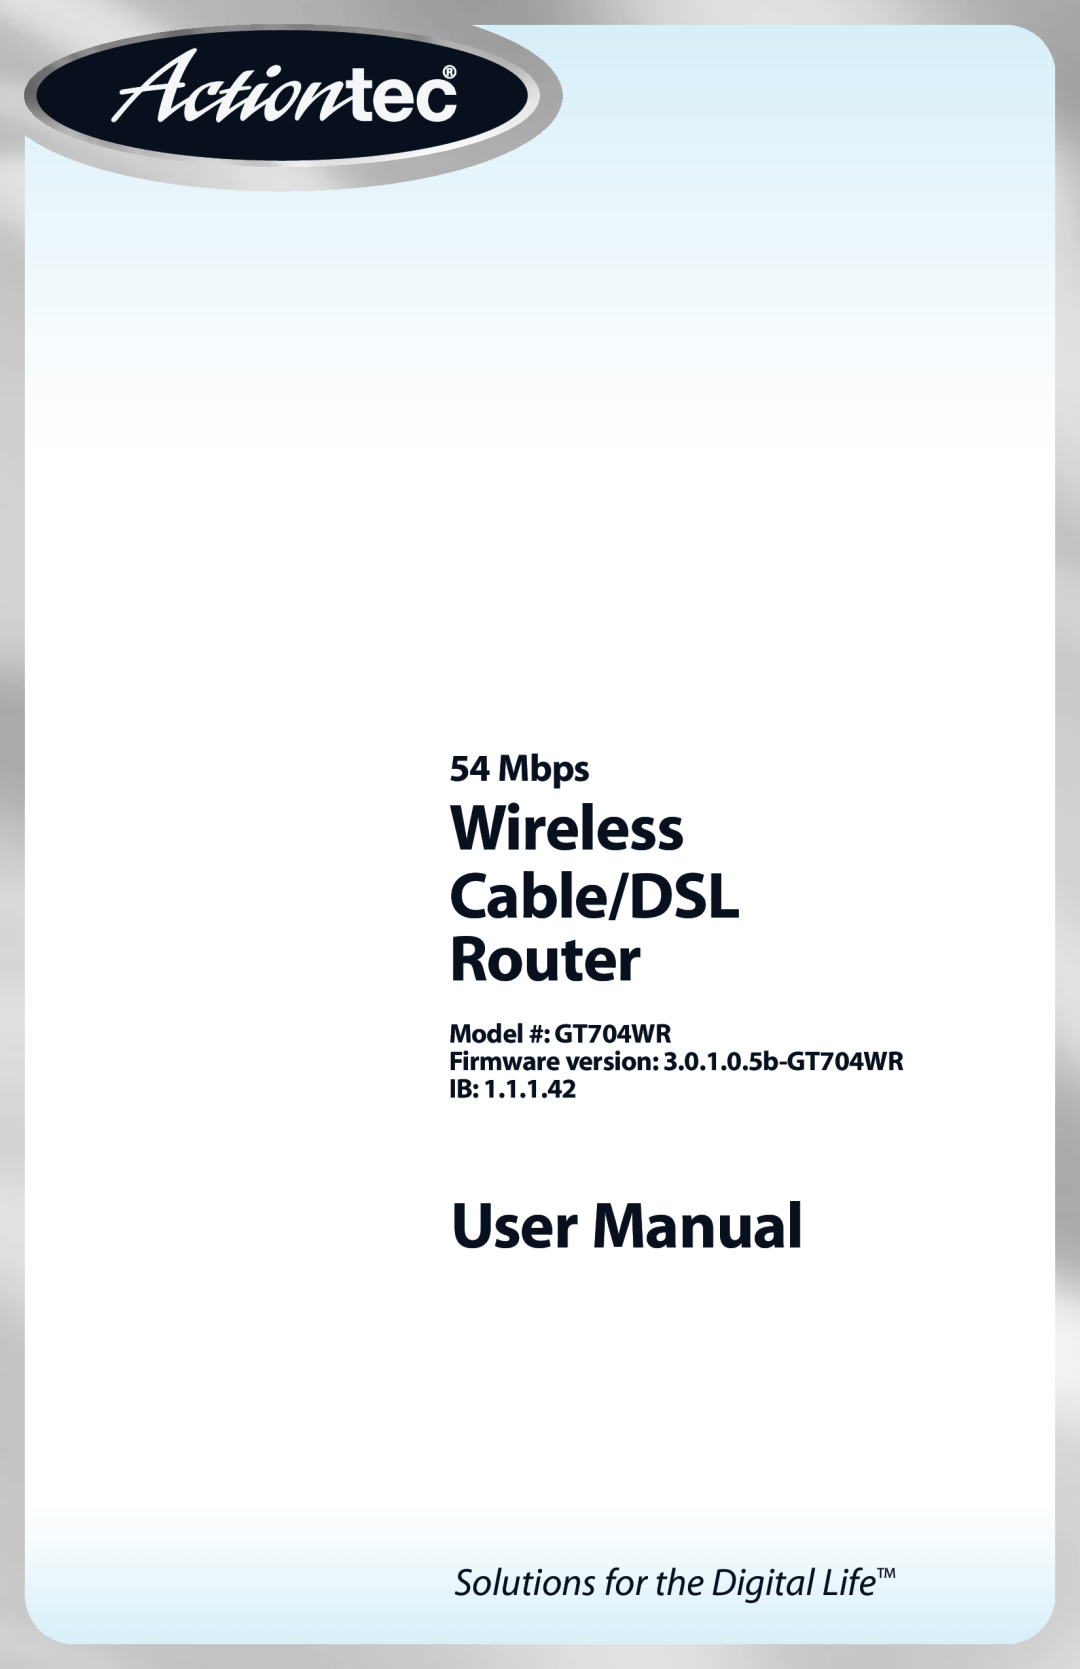 Actiontec electronic GT704WR user manual Wireless Cable/DSL Router, User Manual, Mbps, Solutions for the Digital Life 